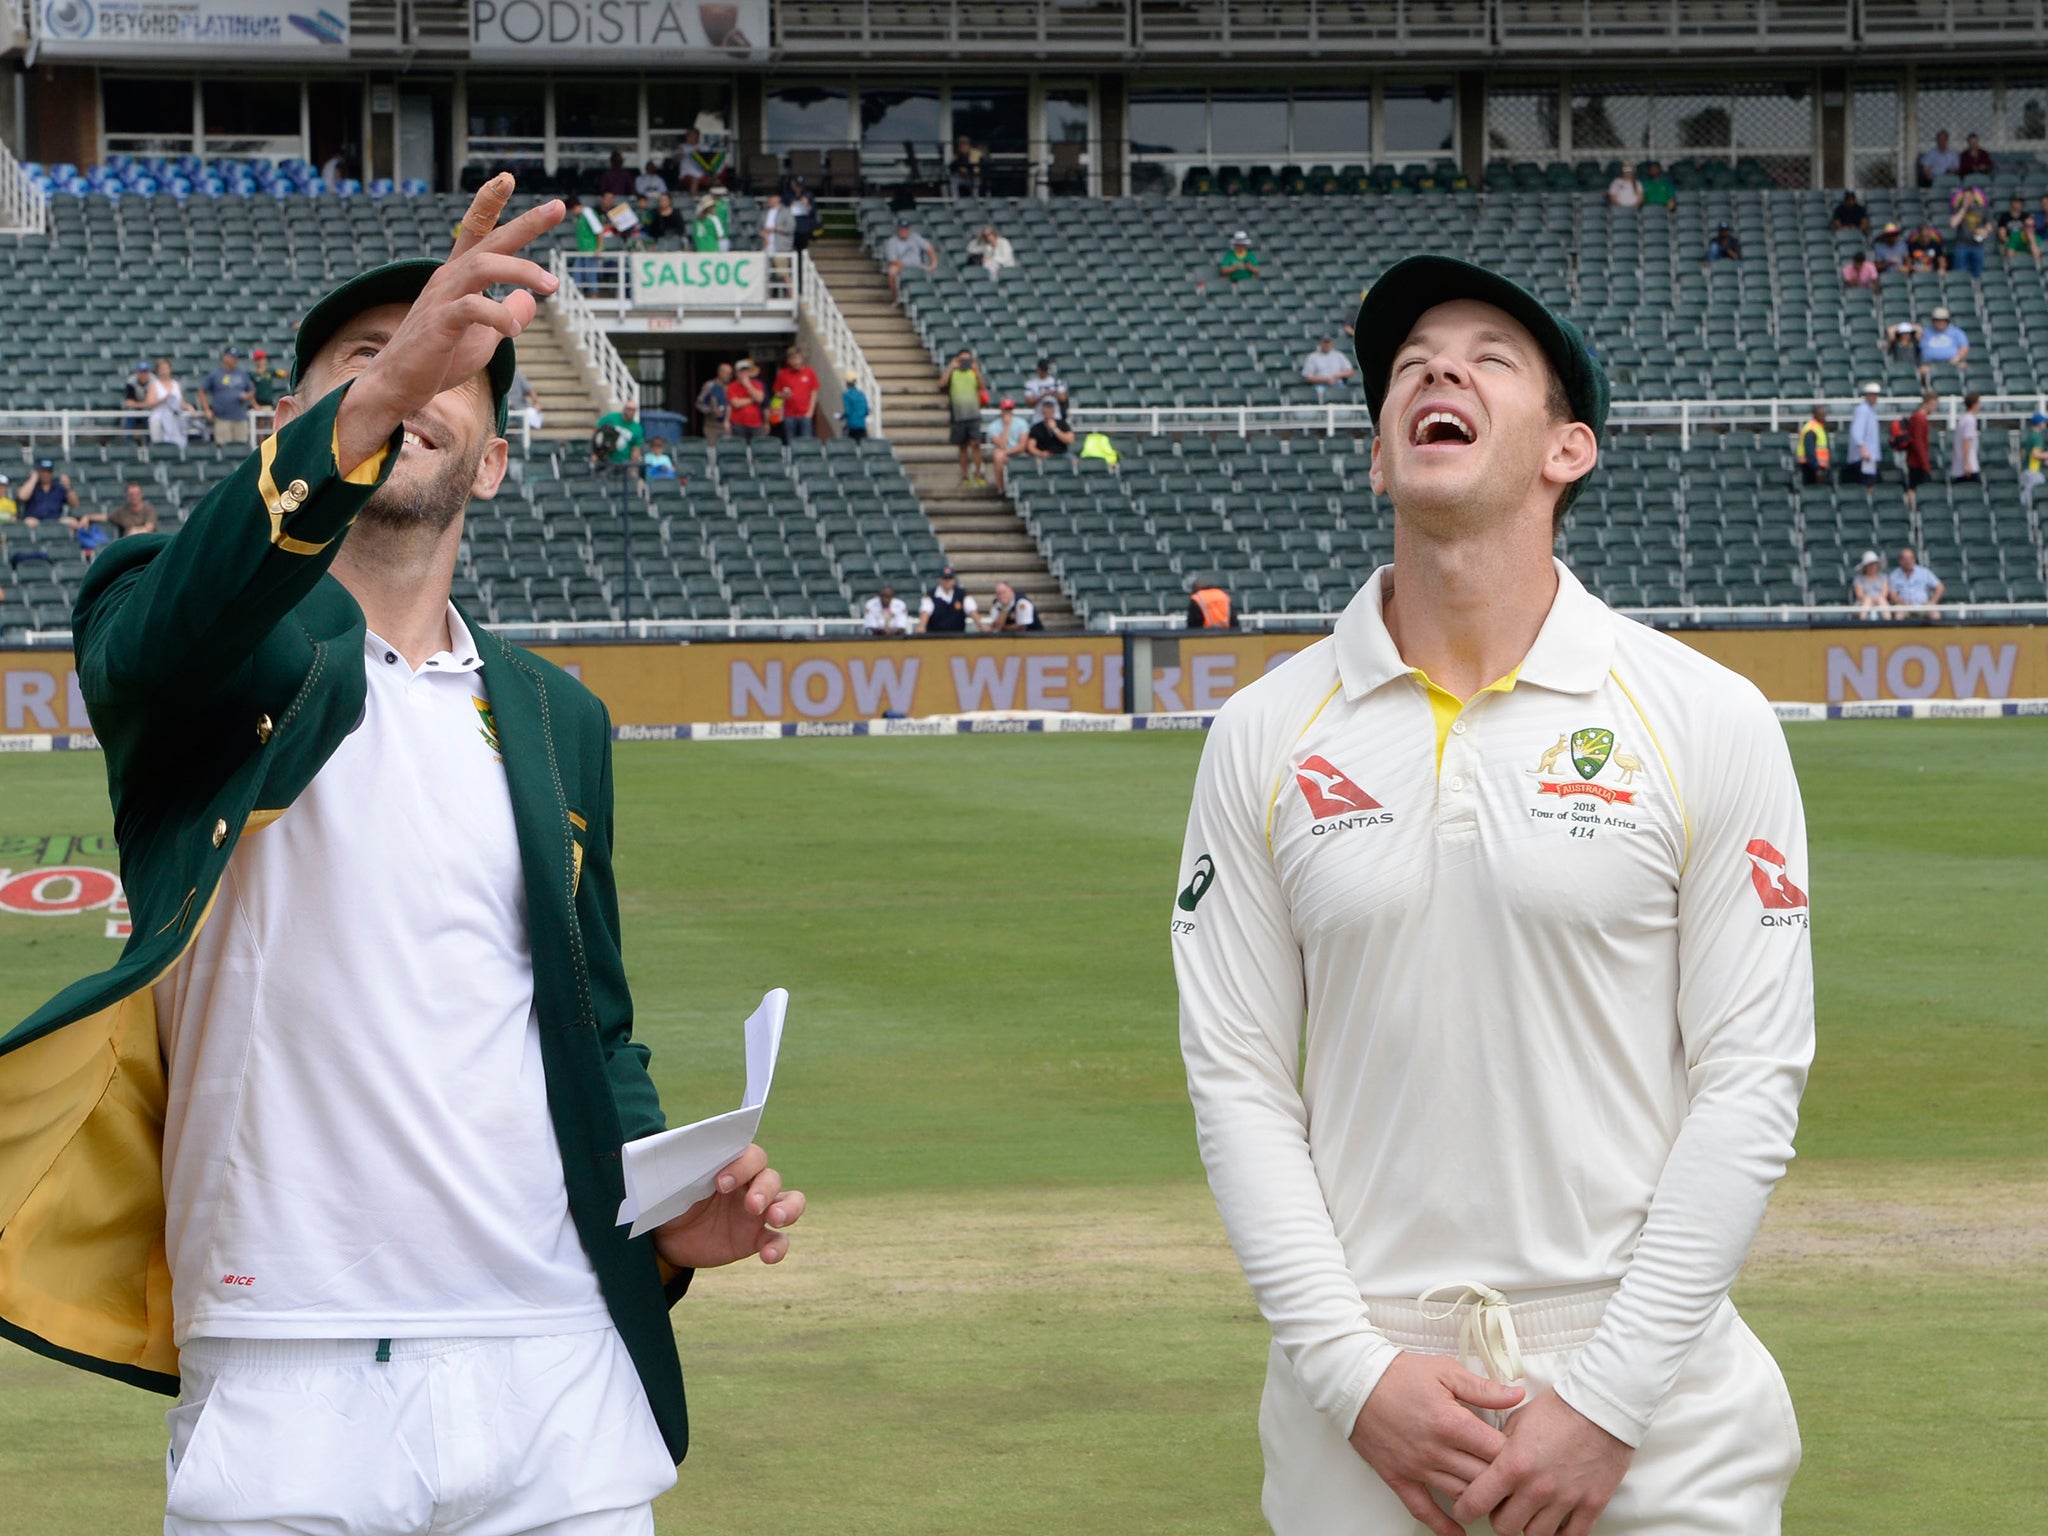 Tim Paine took over the captaincy in Steve Smith's absence